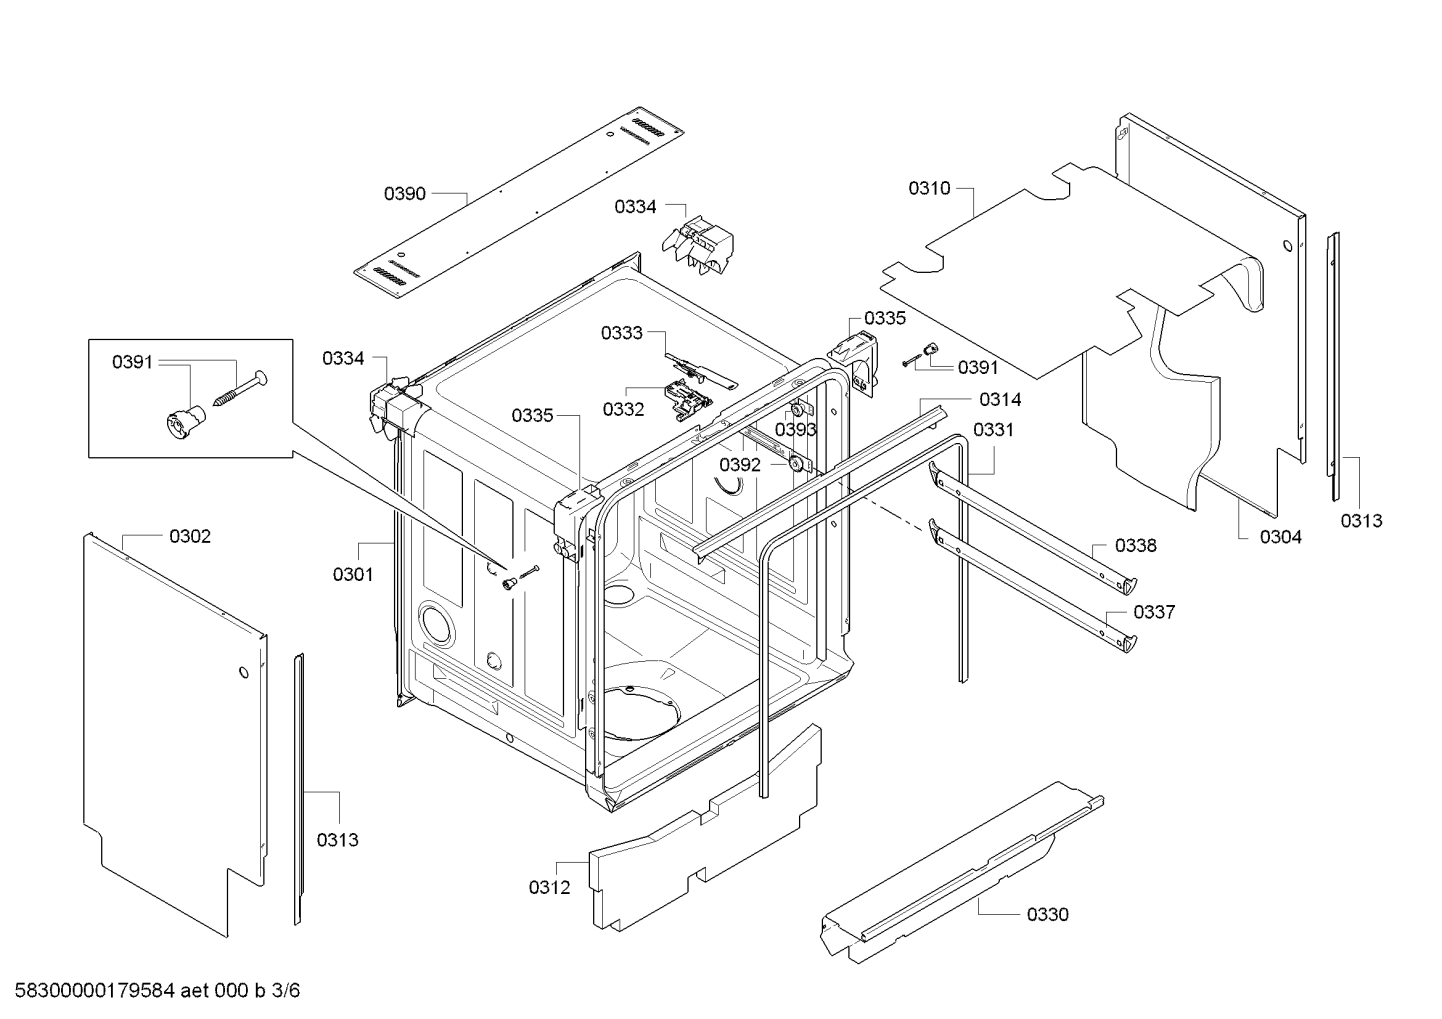 drawing_link_3_device_1744854